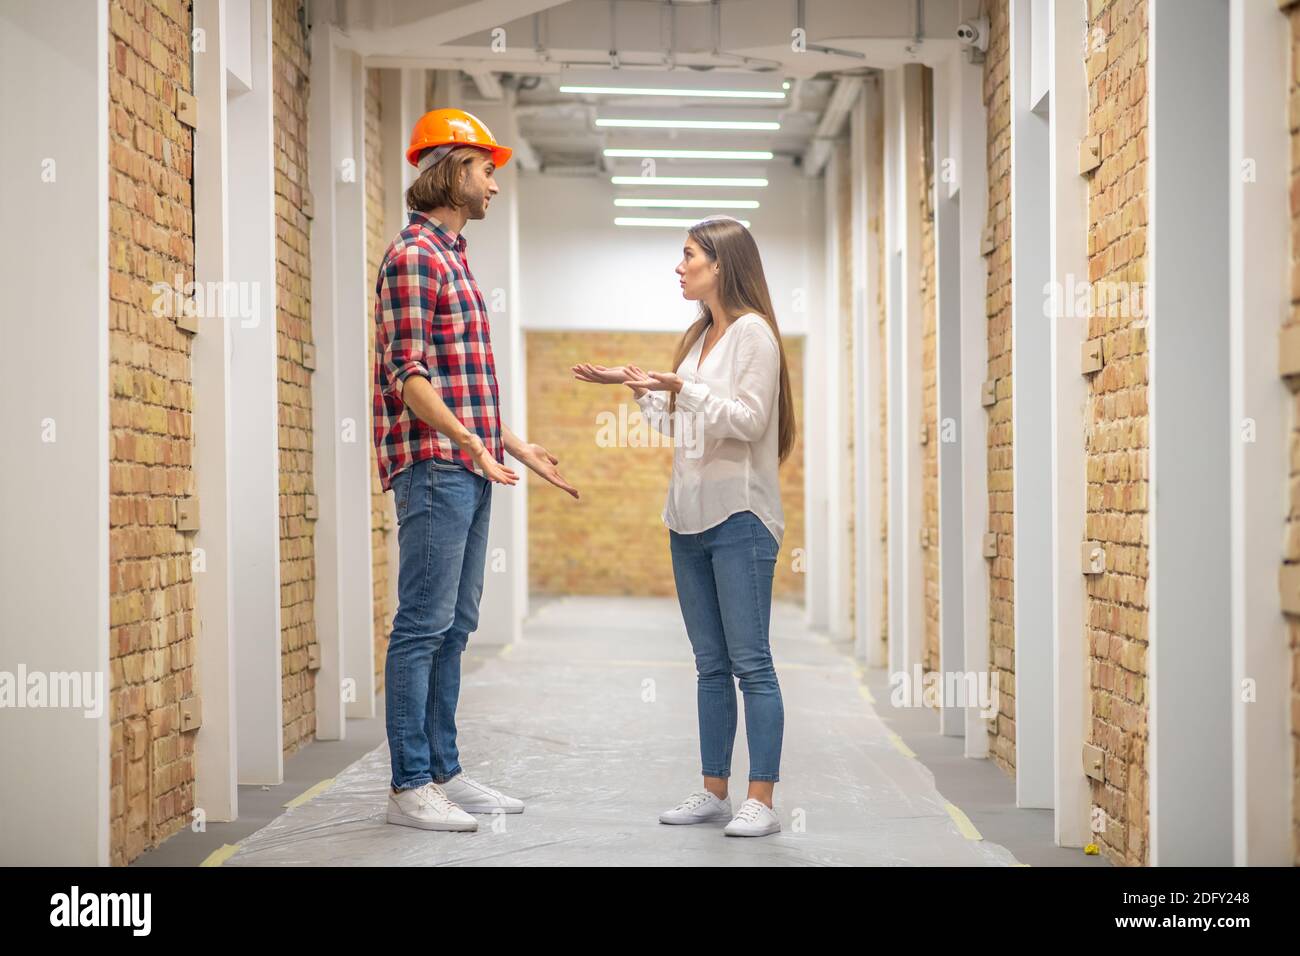 Female purchaser discussing construction issues with the worker Stock Photo